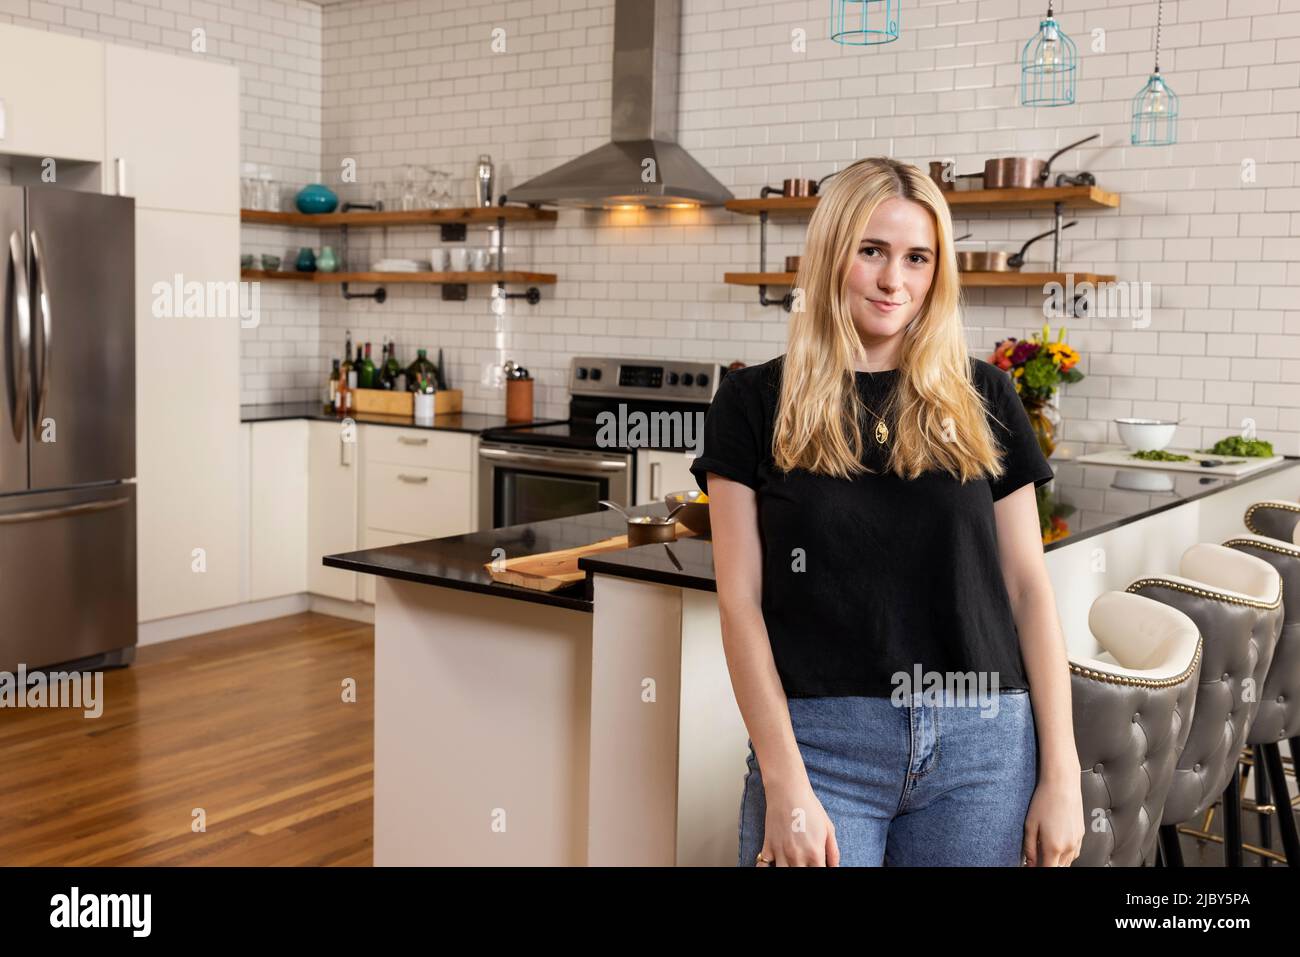 Portrait of a young Caucasian woman standing in kitchen looking at camera confidently. Stock Photo